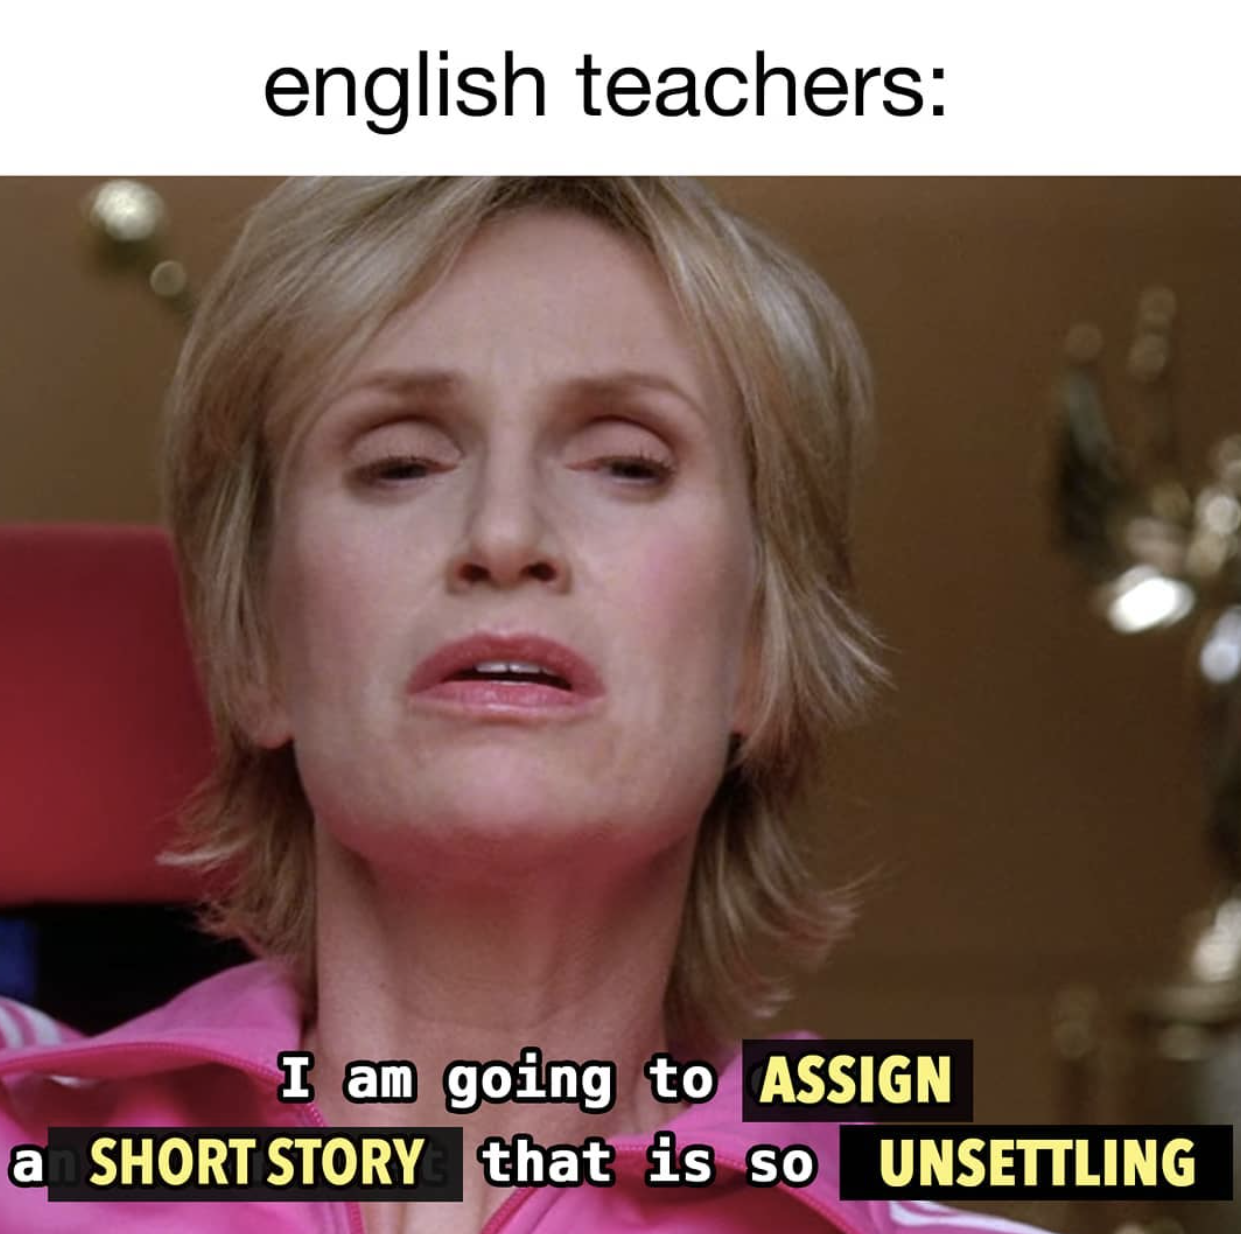 SparkNotes memes - twilight esme memes - english teachers I am going to Assign a Short Story that is so Unsettling